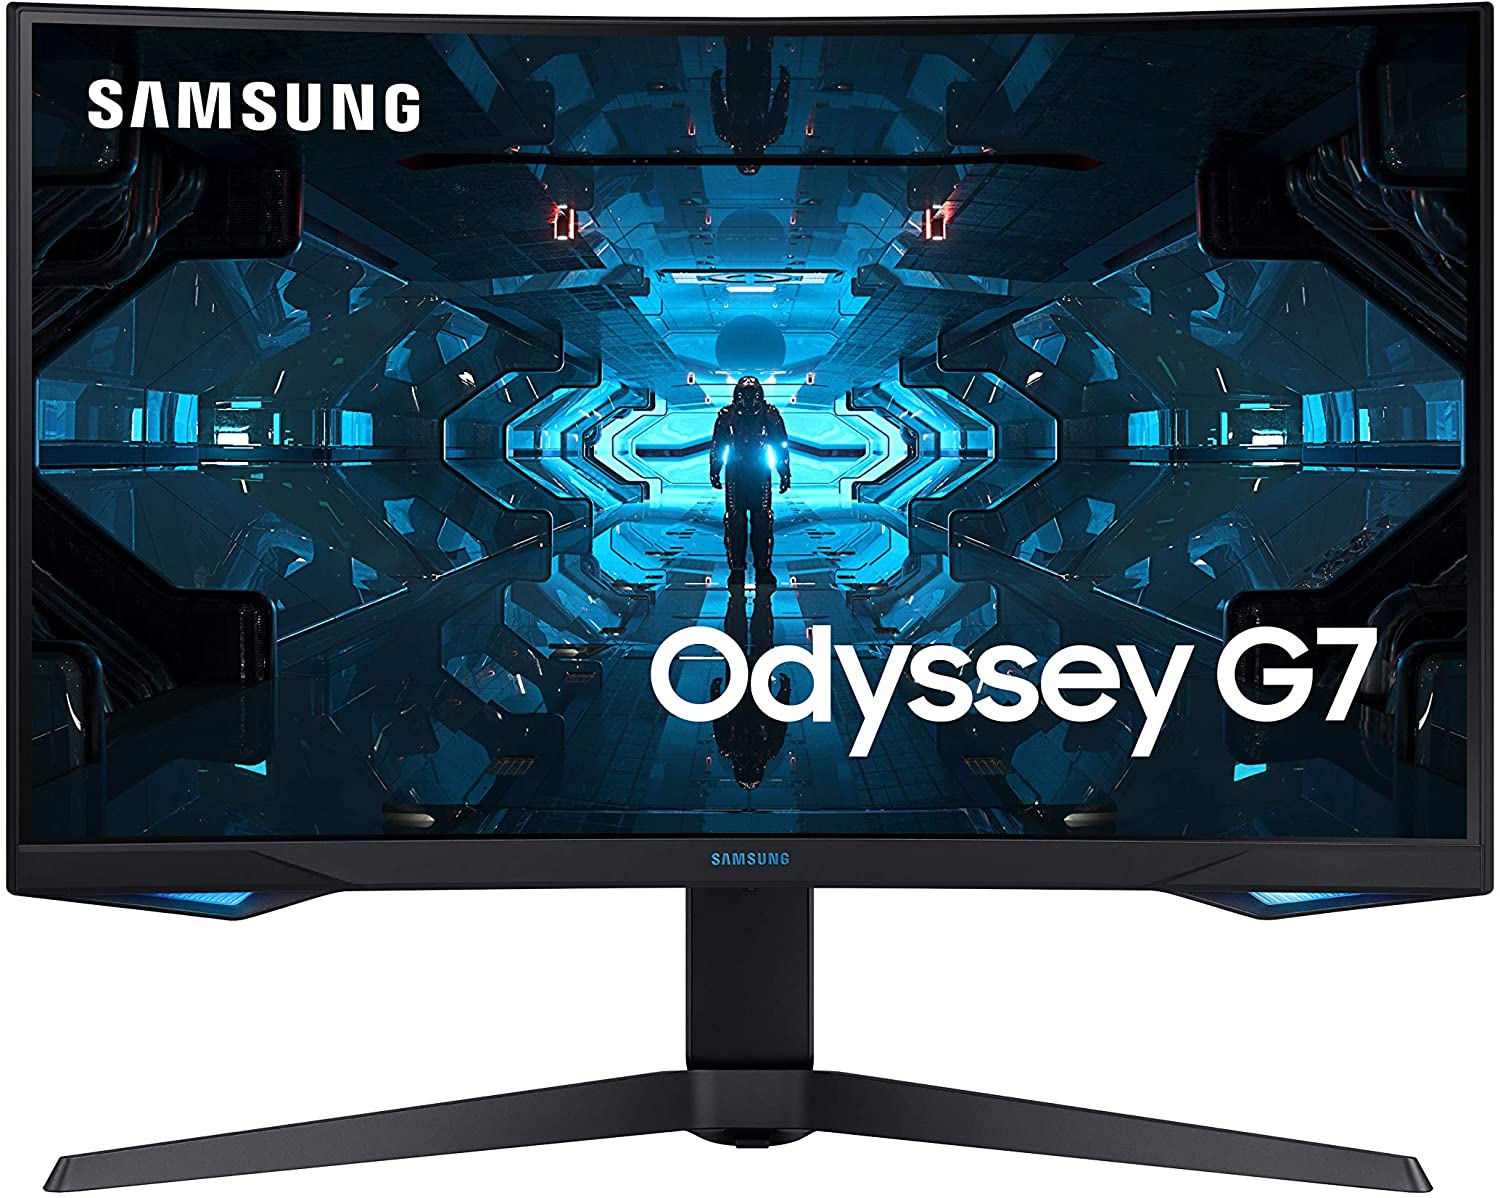 Curved Samsung Odyssey G7 from the front on a white background